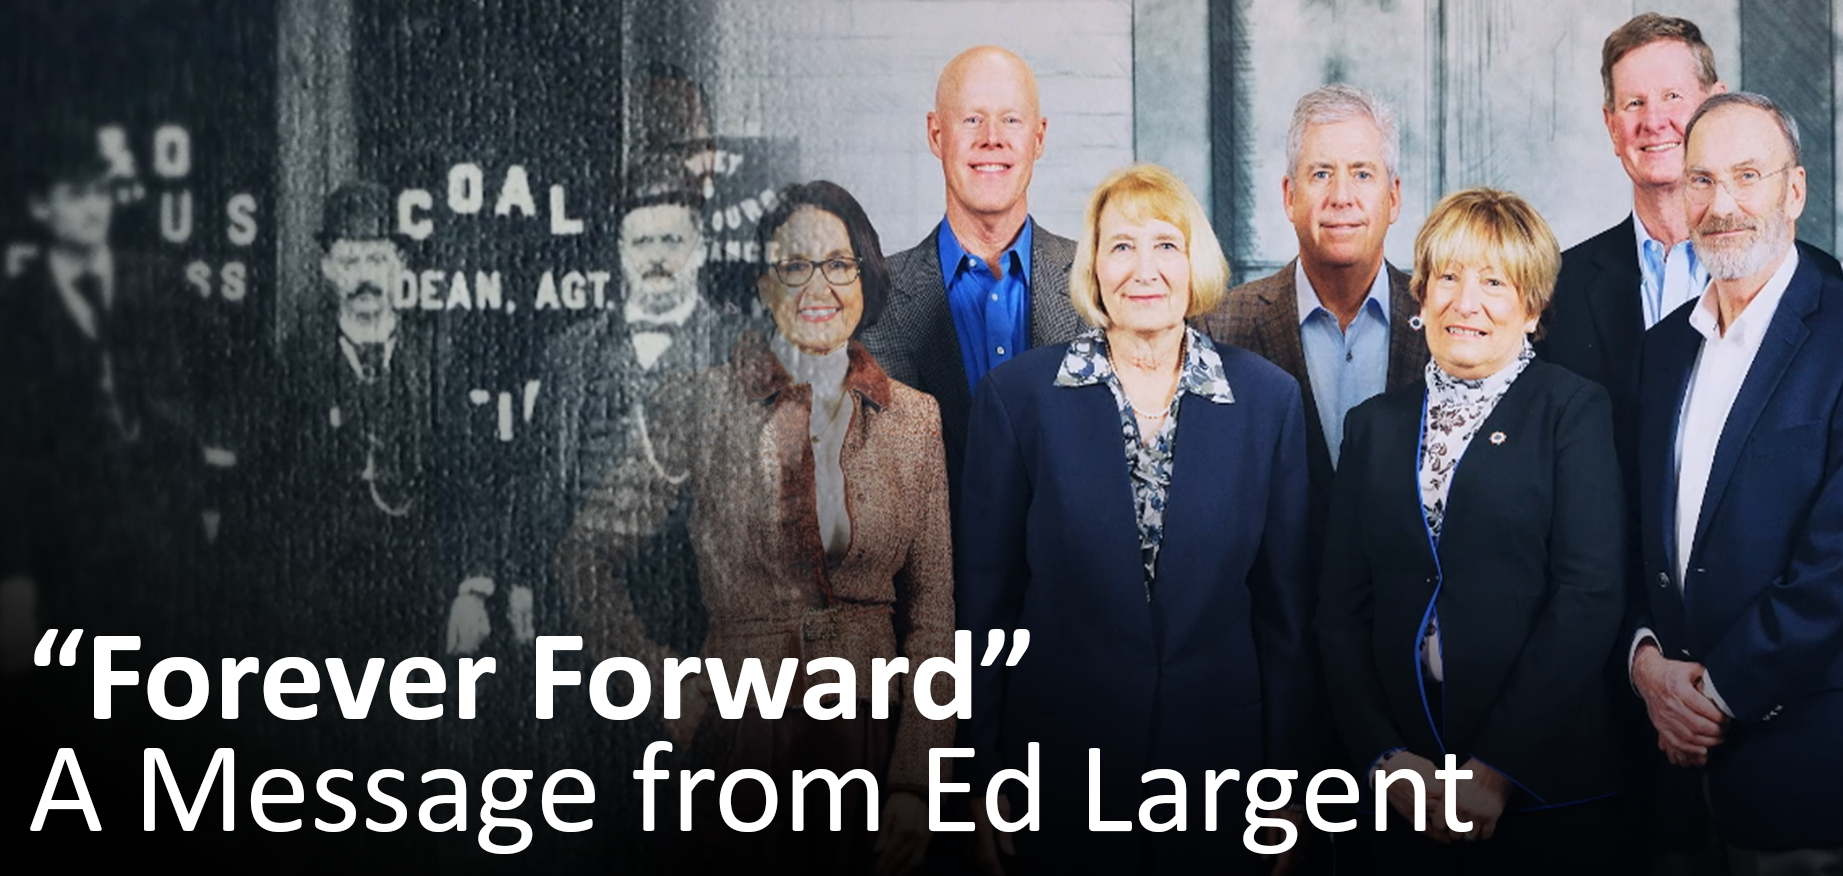 WATCH: "Forever Forward" - A Message from Ed Largent